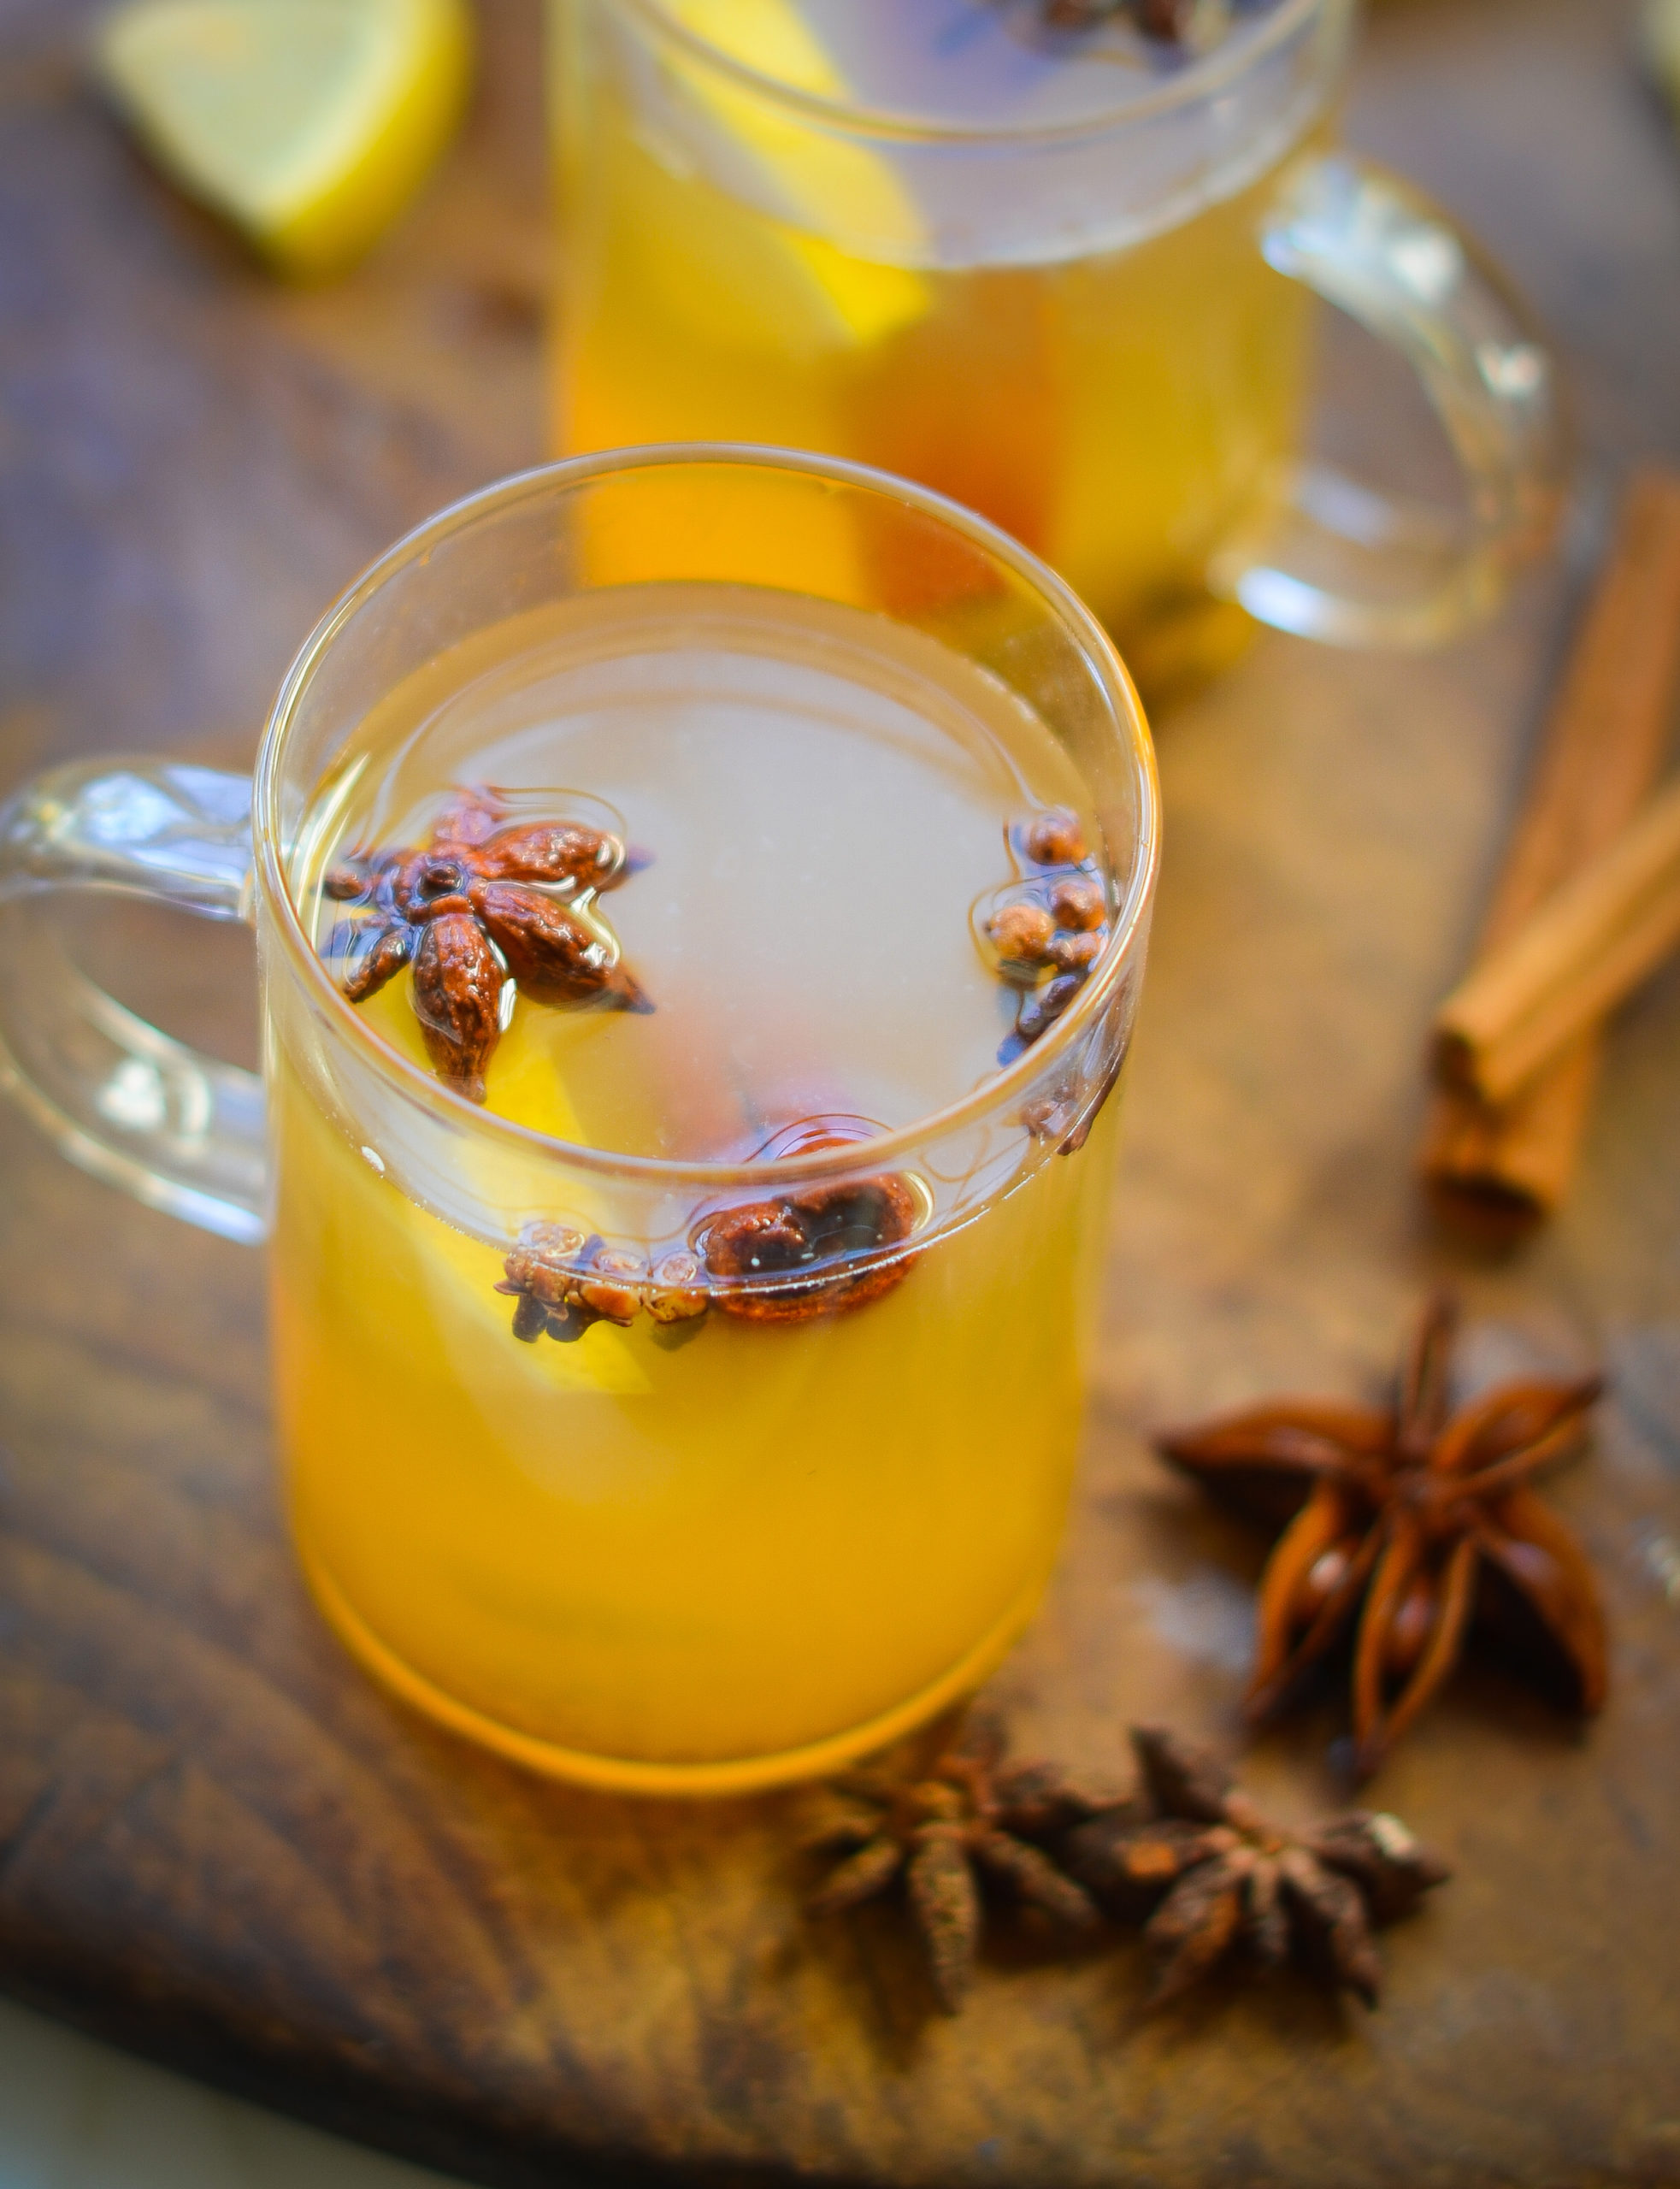 https://www.onceuponachef.com/images/2020/12/Hot-Toddy-scaled.jpg